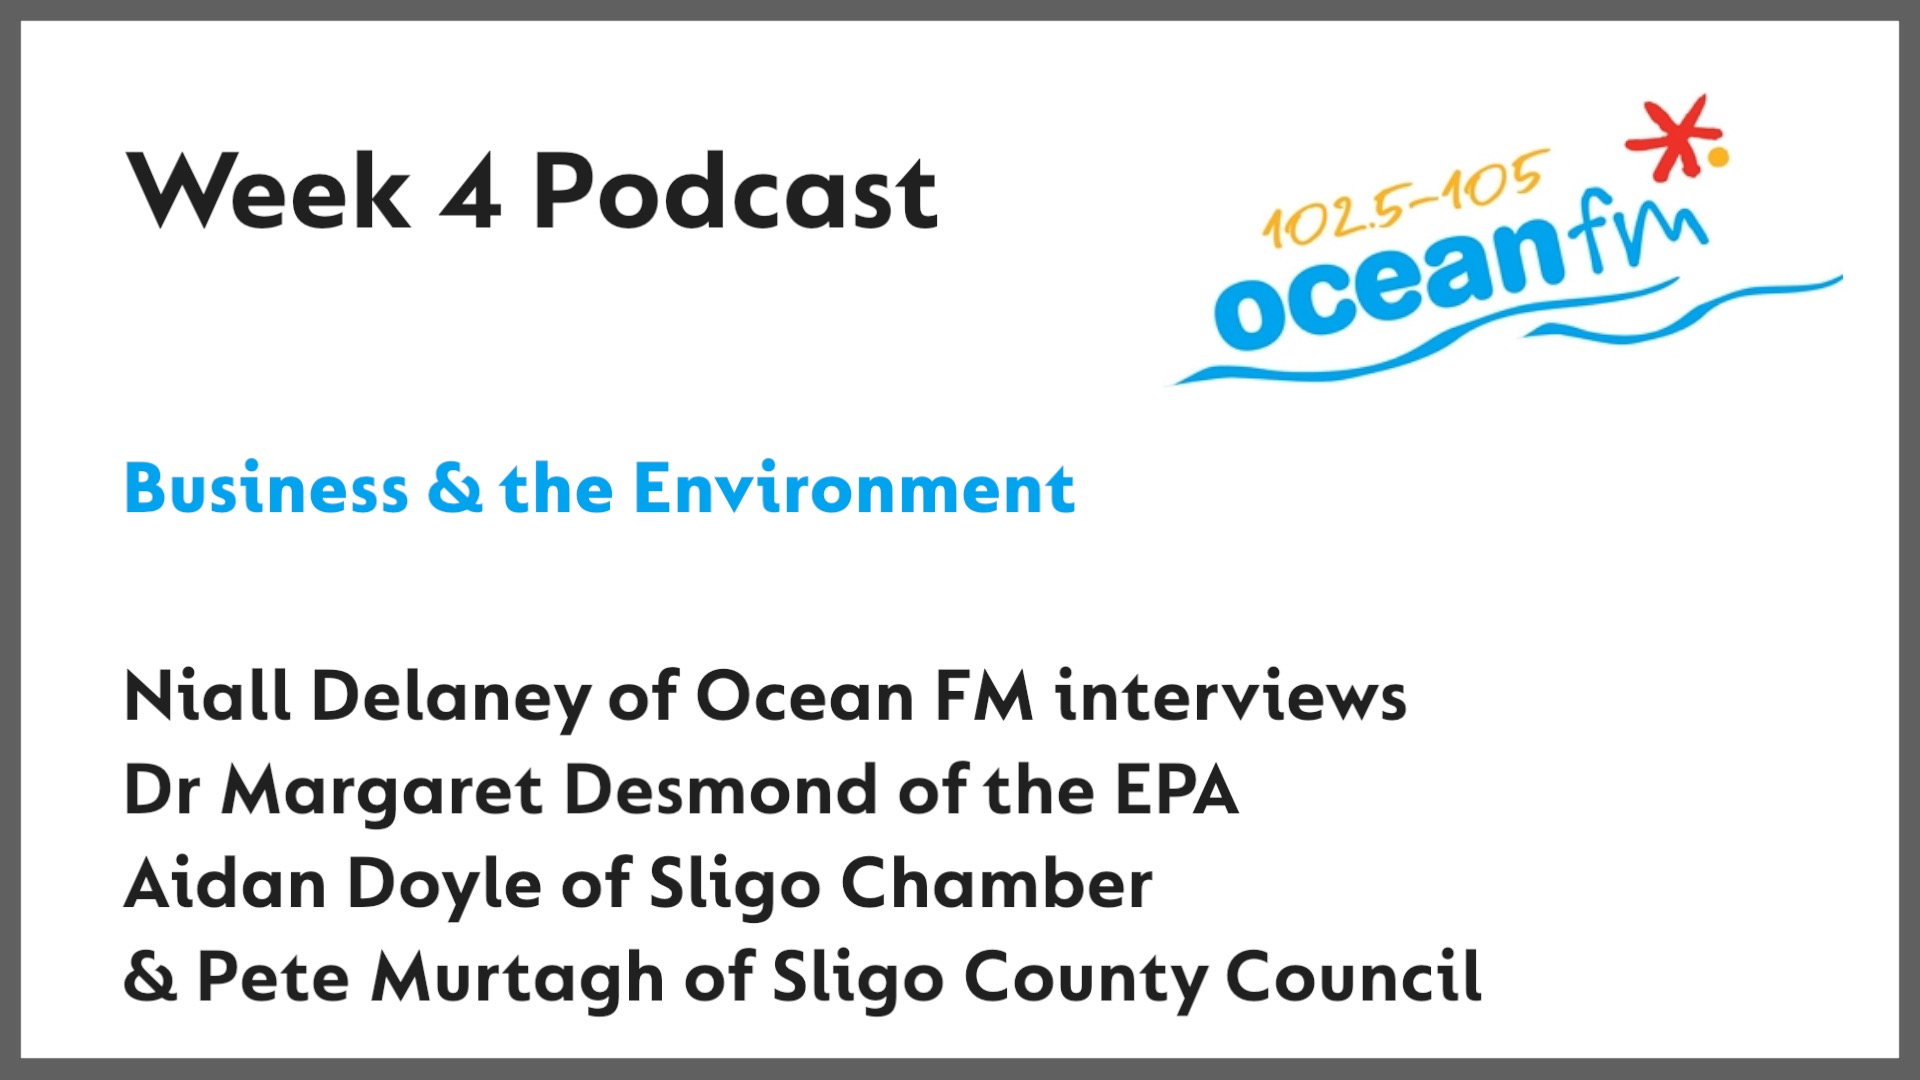 Business & the Environment - Interview on Ocean FM